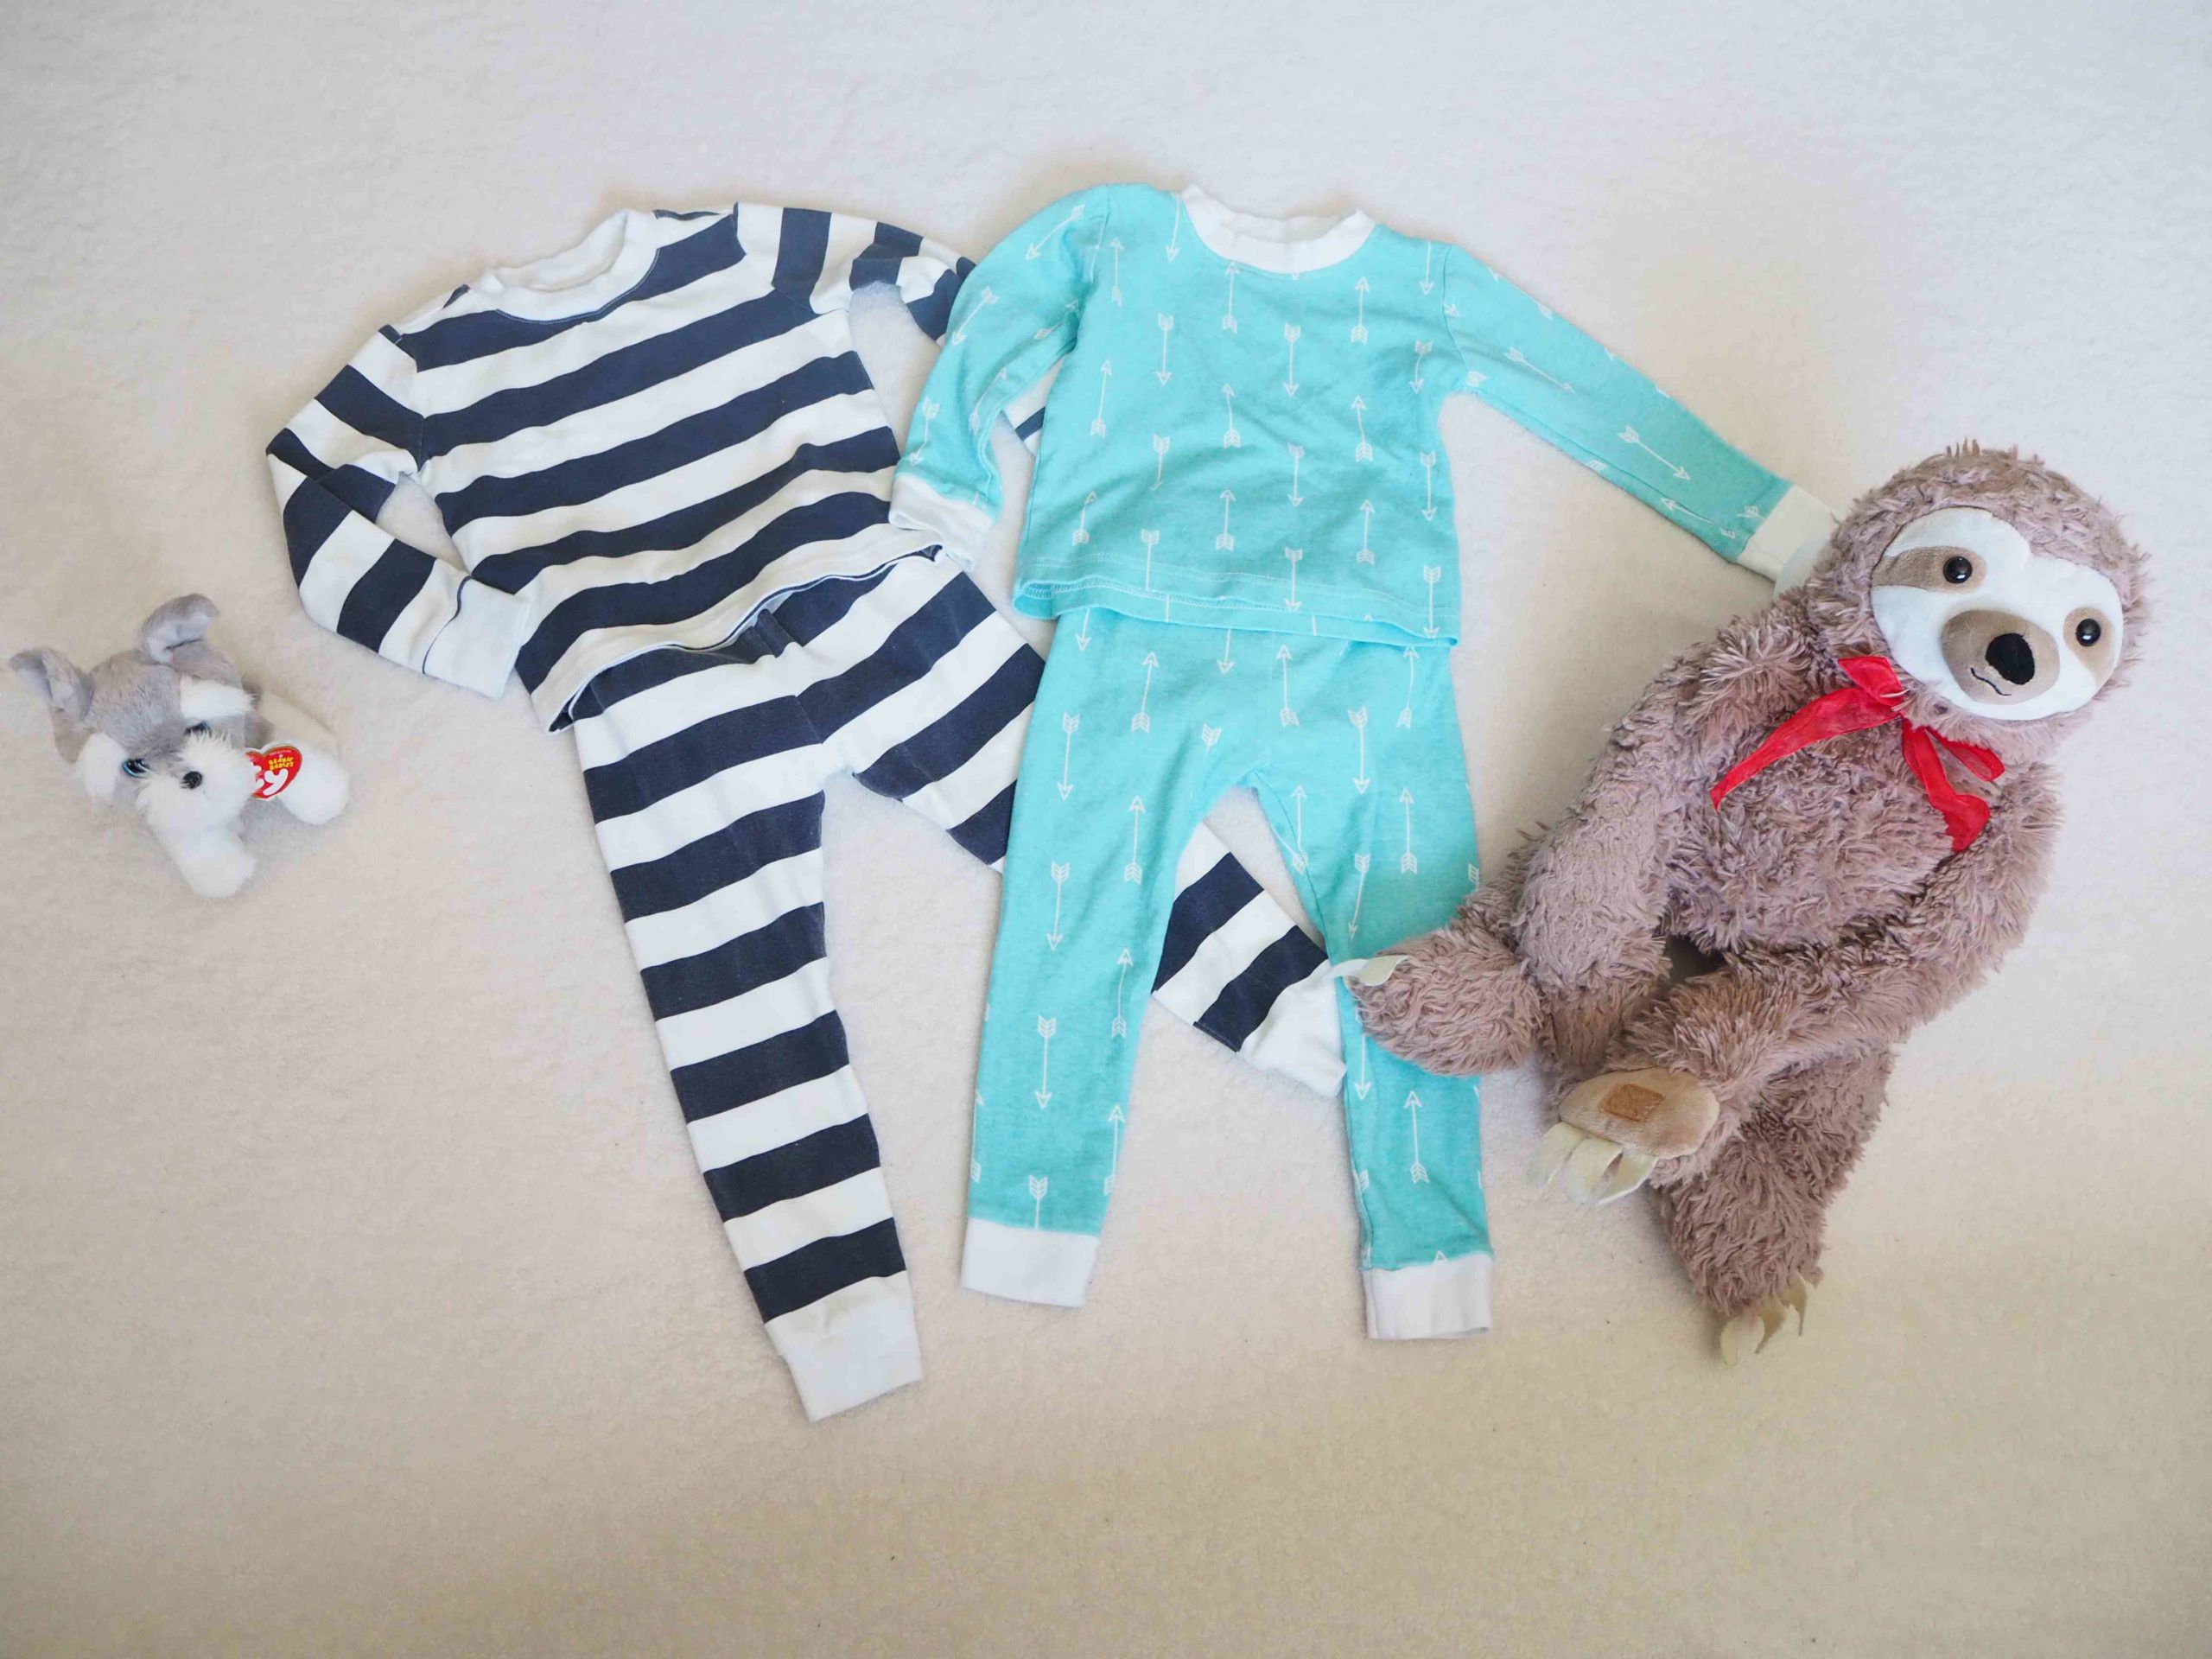 two pairs of peejamas laid out on the floor next to stuffed sloth toy